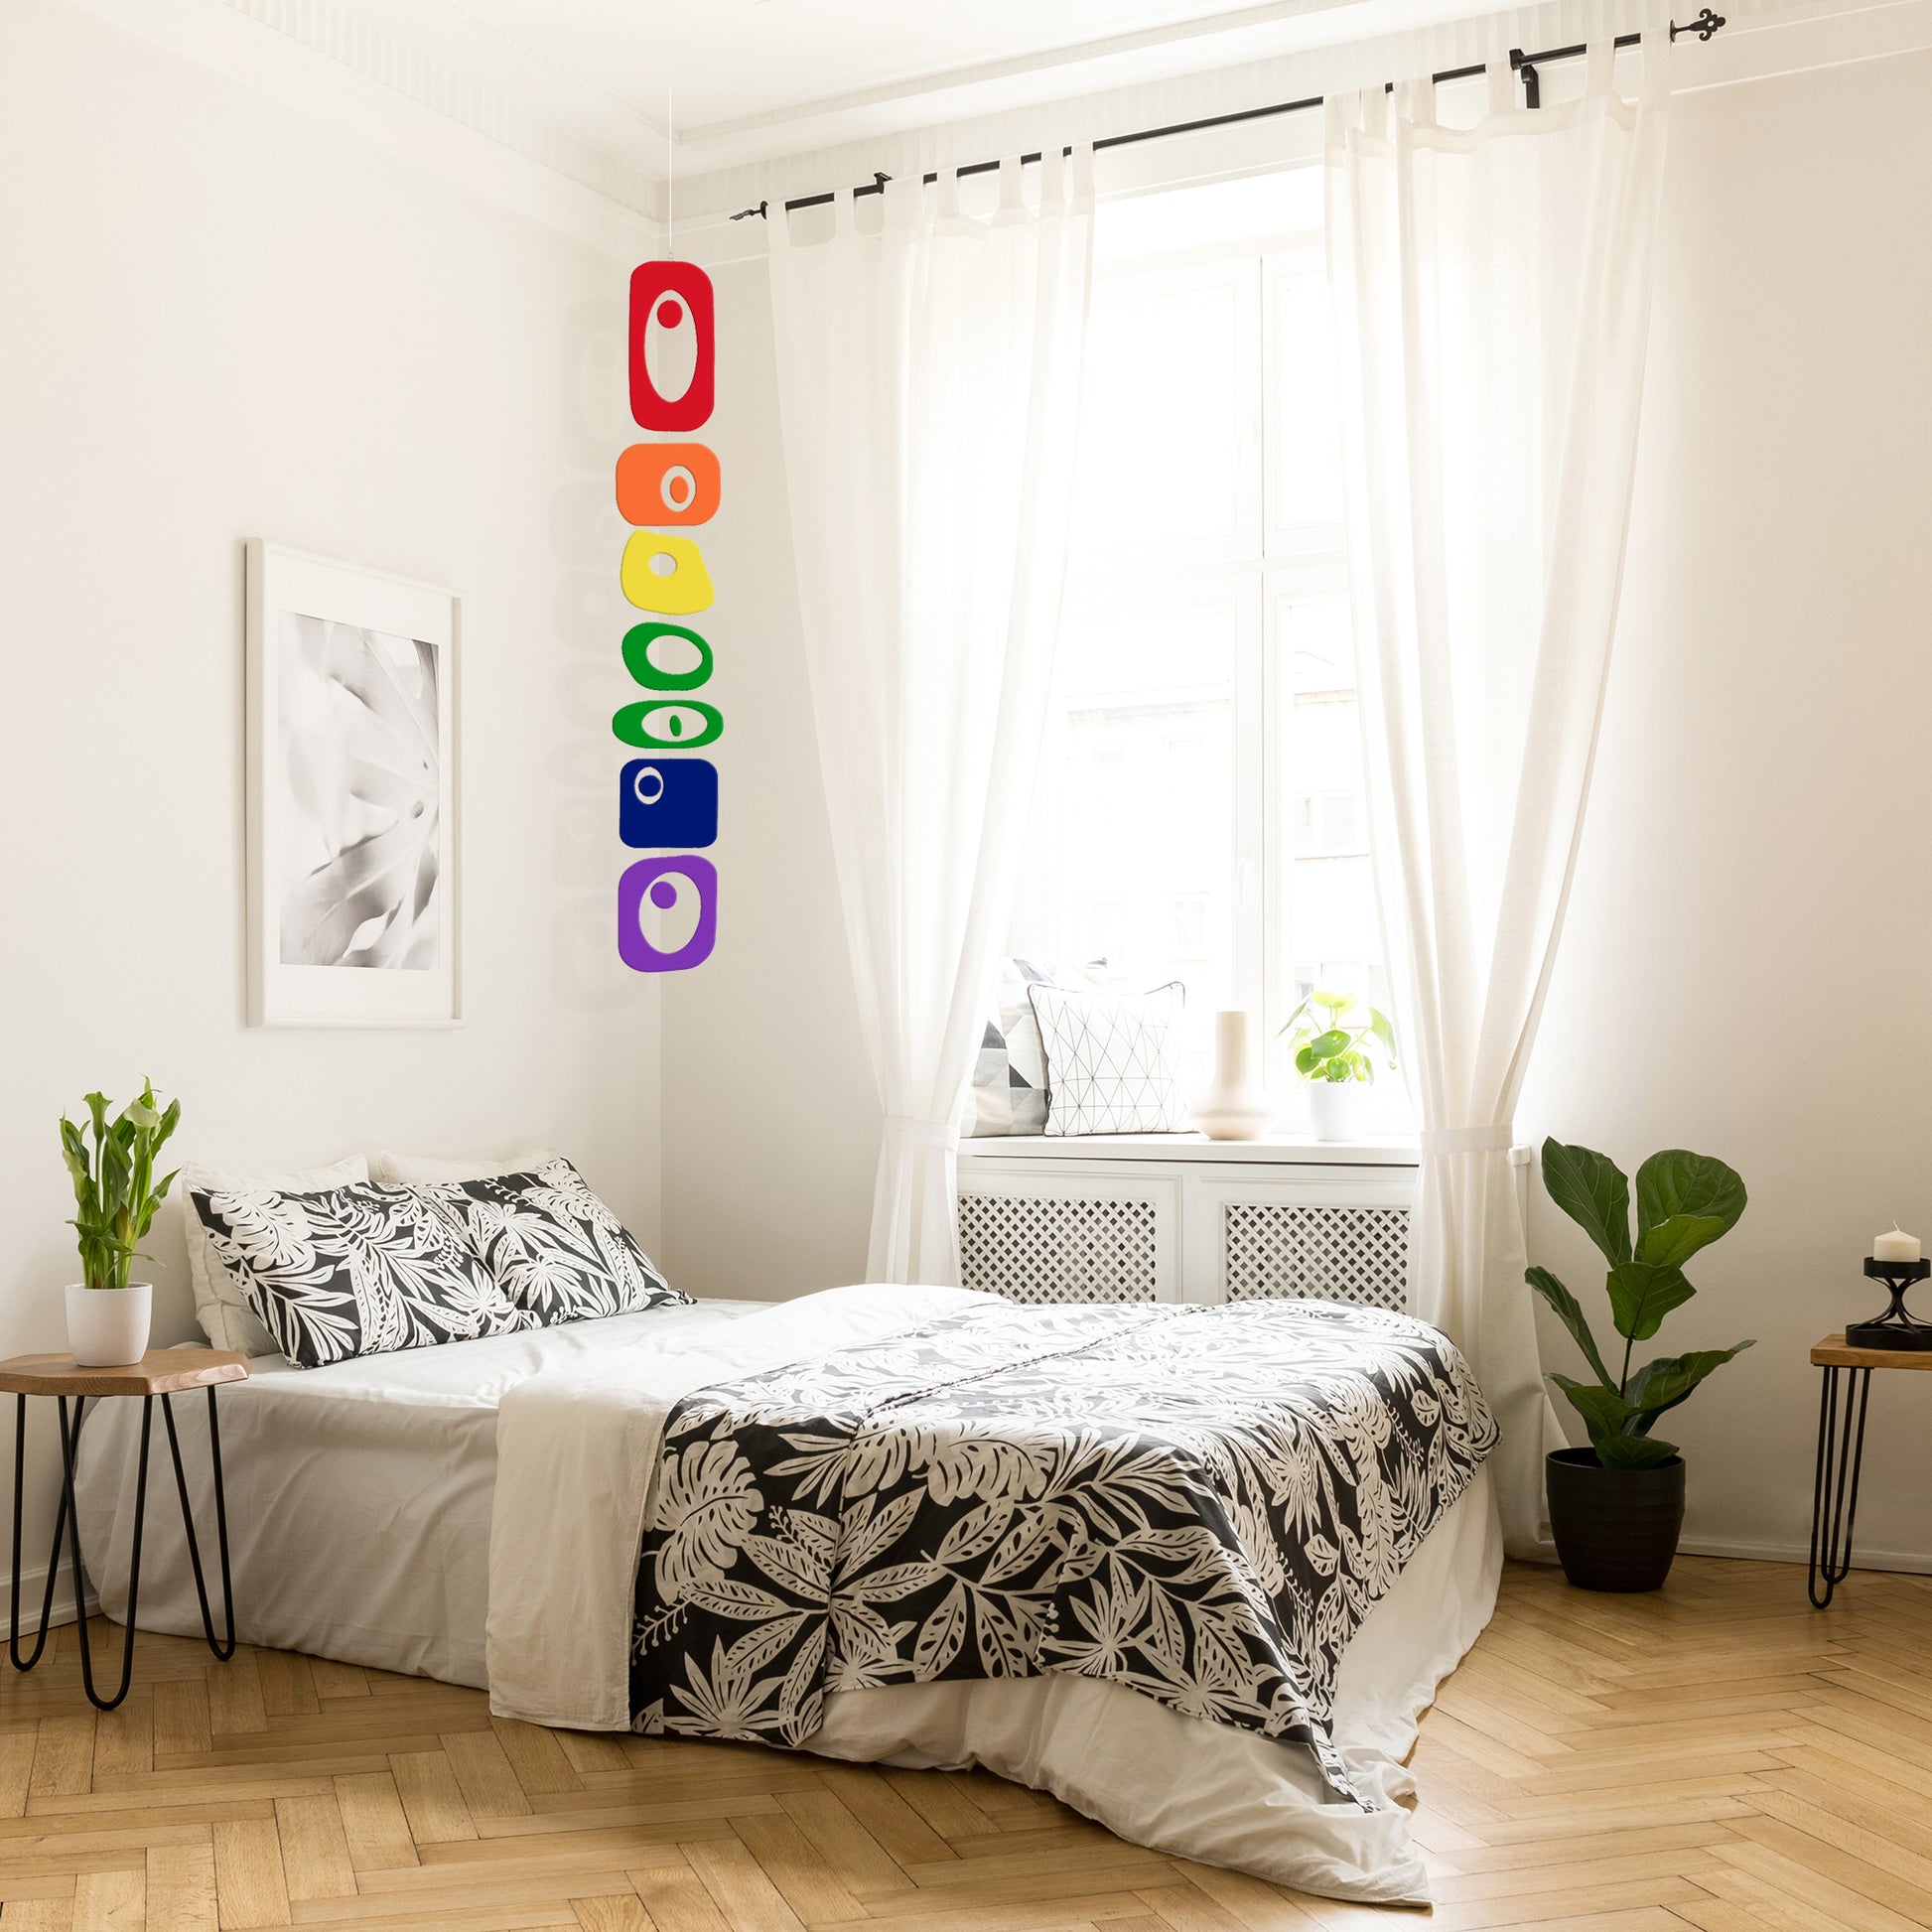 Rainbow Coolsville Vertical Hanging Art Mobile in cozy bedroom with wood floor by AtomicMobiles.com